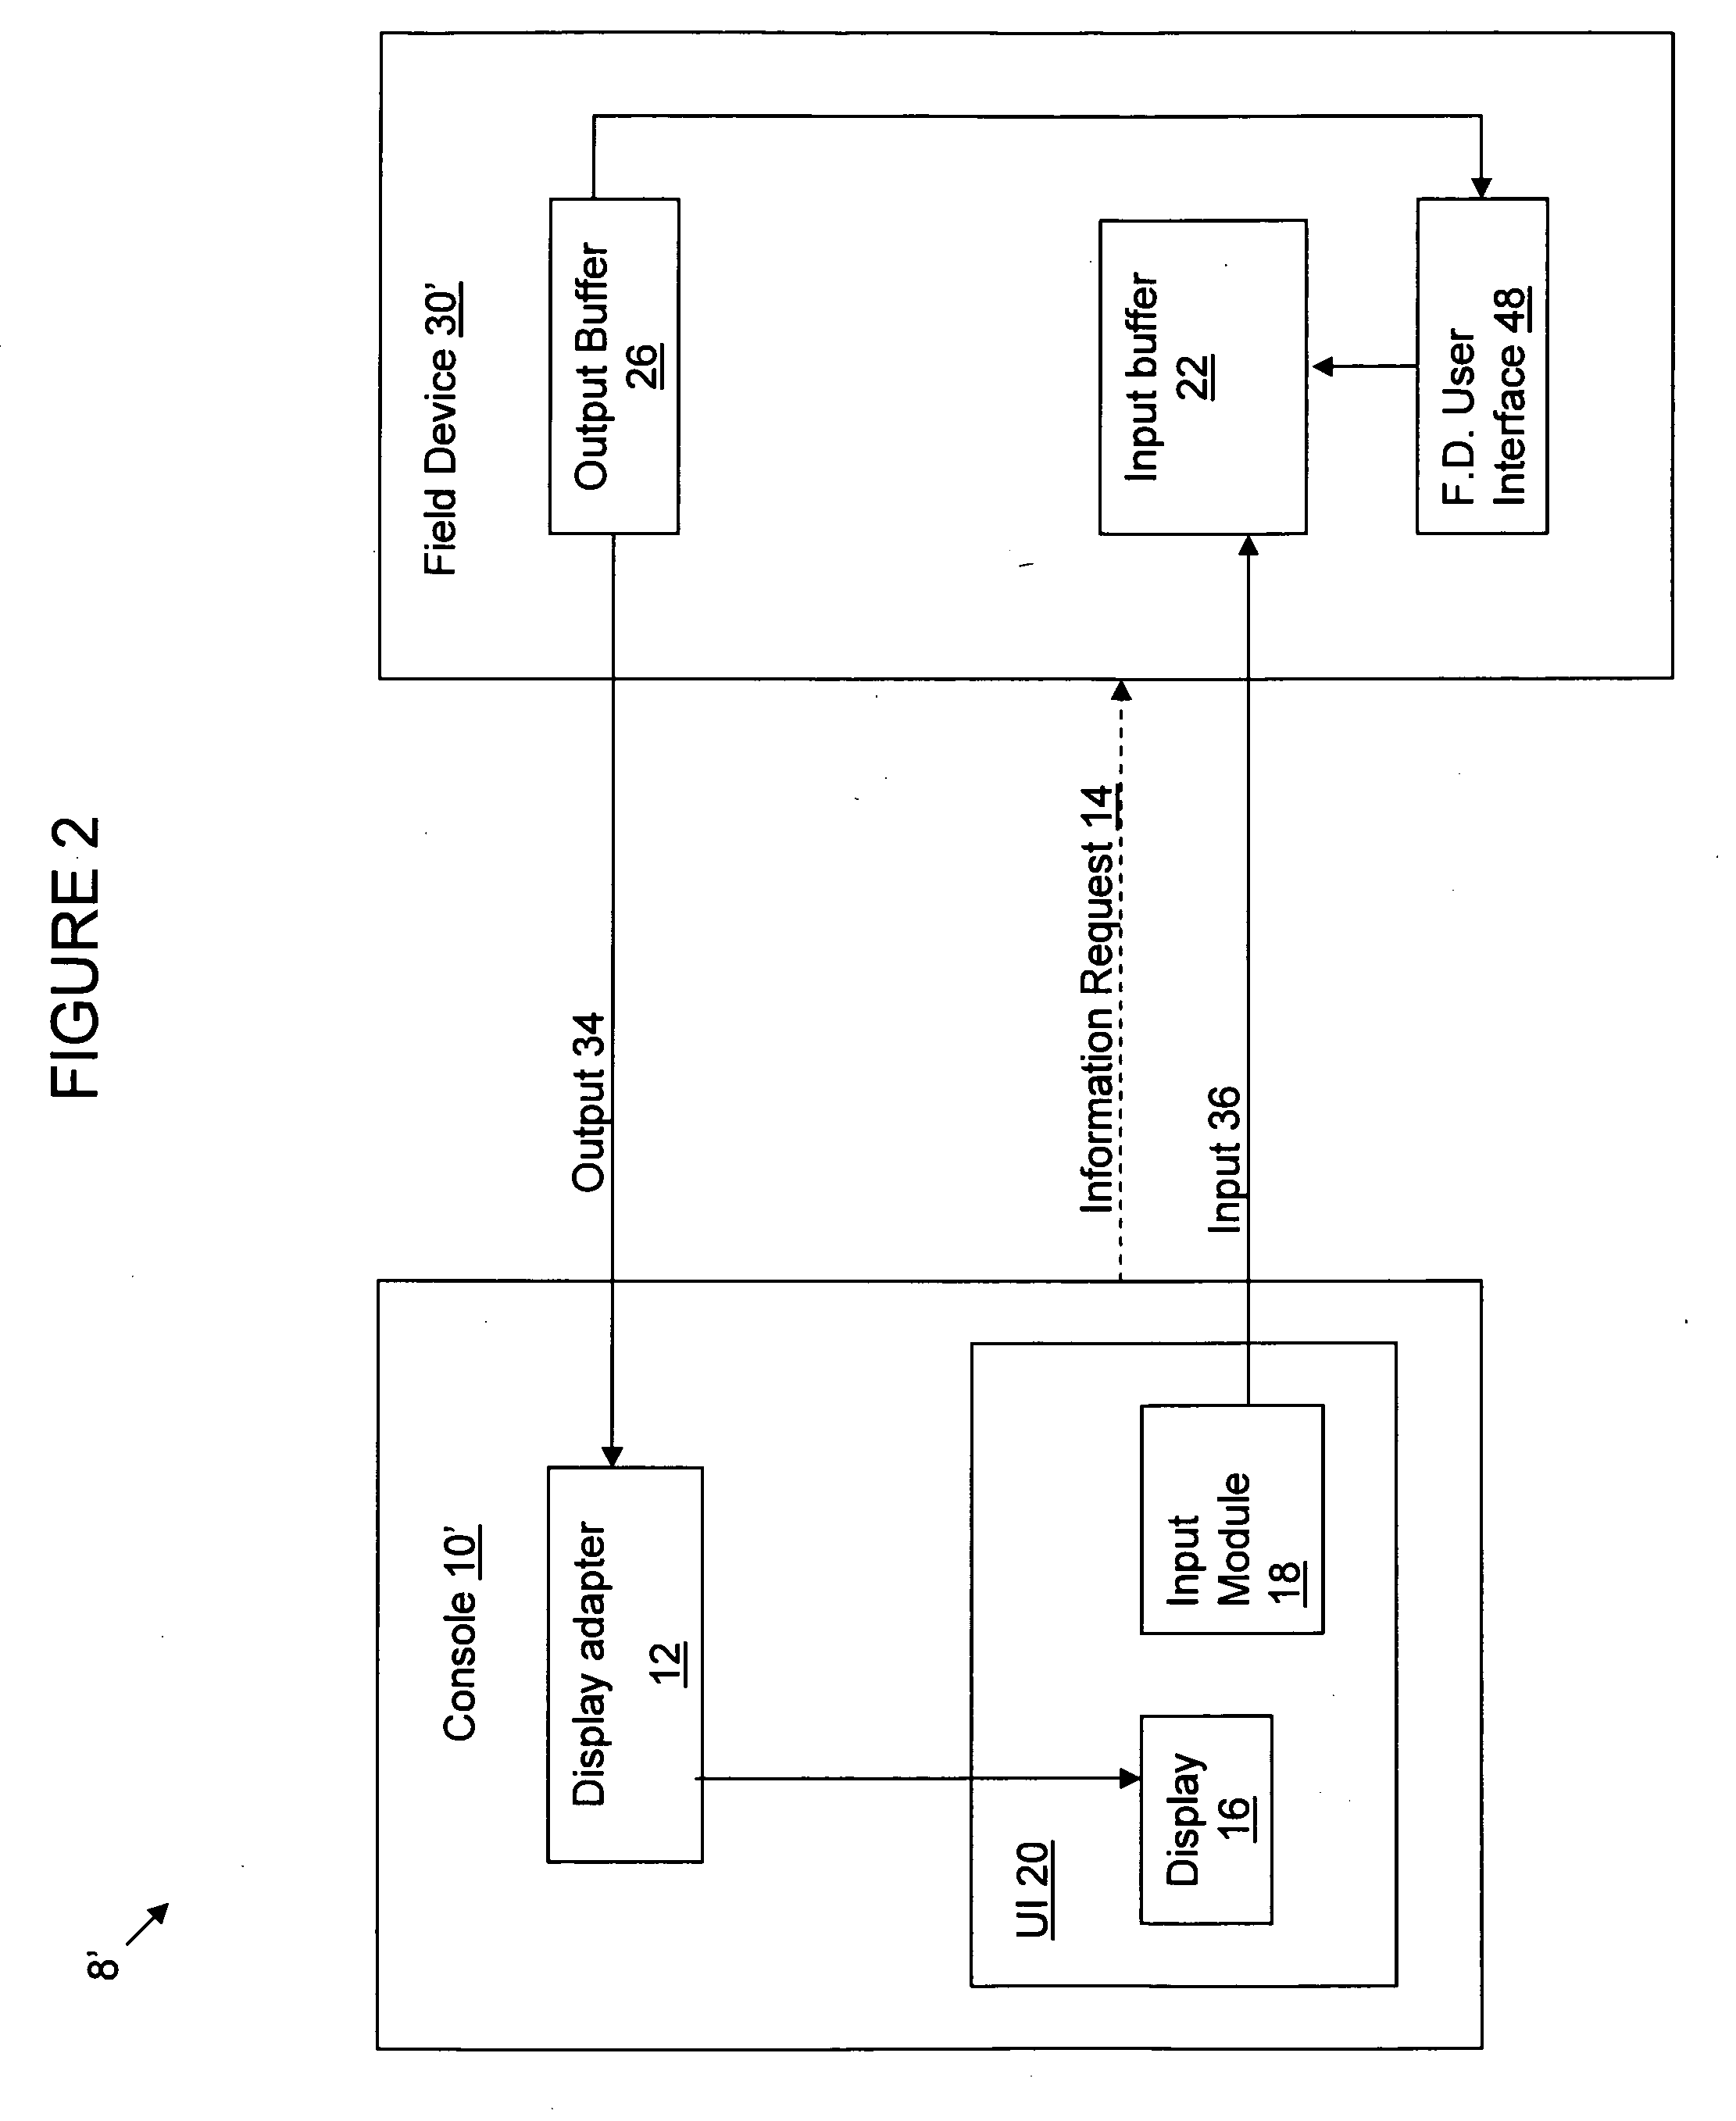 System and Method for Remote Monitoring and Control of Field Device